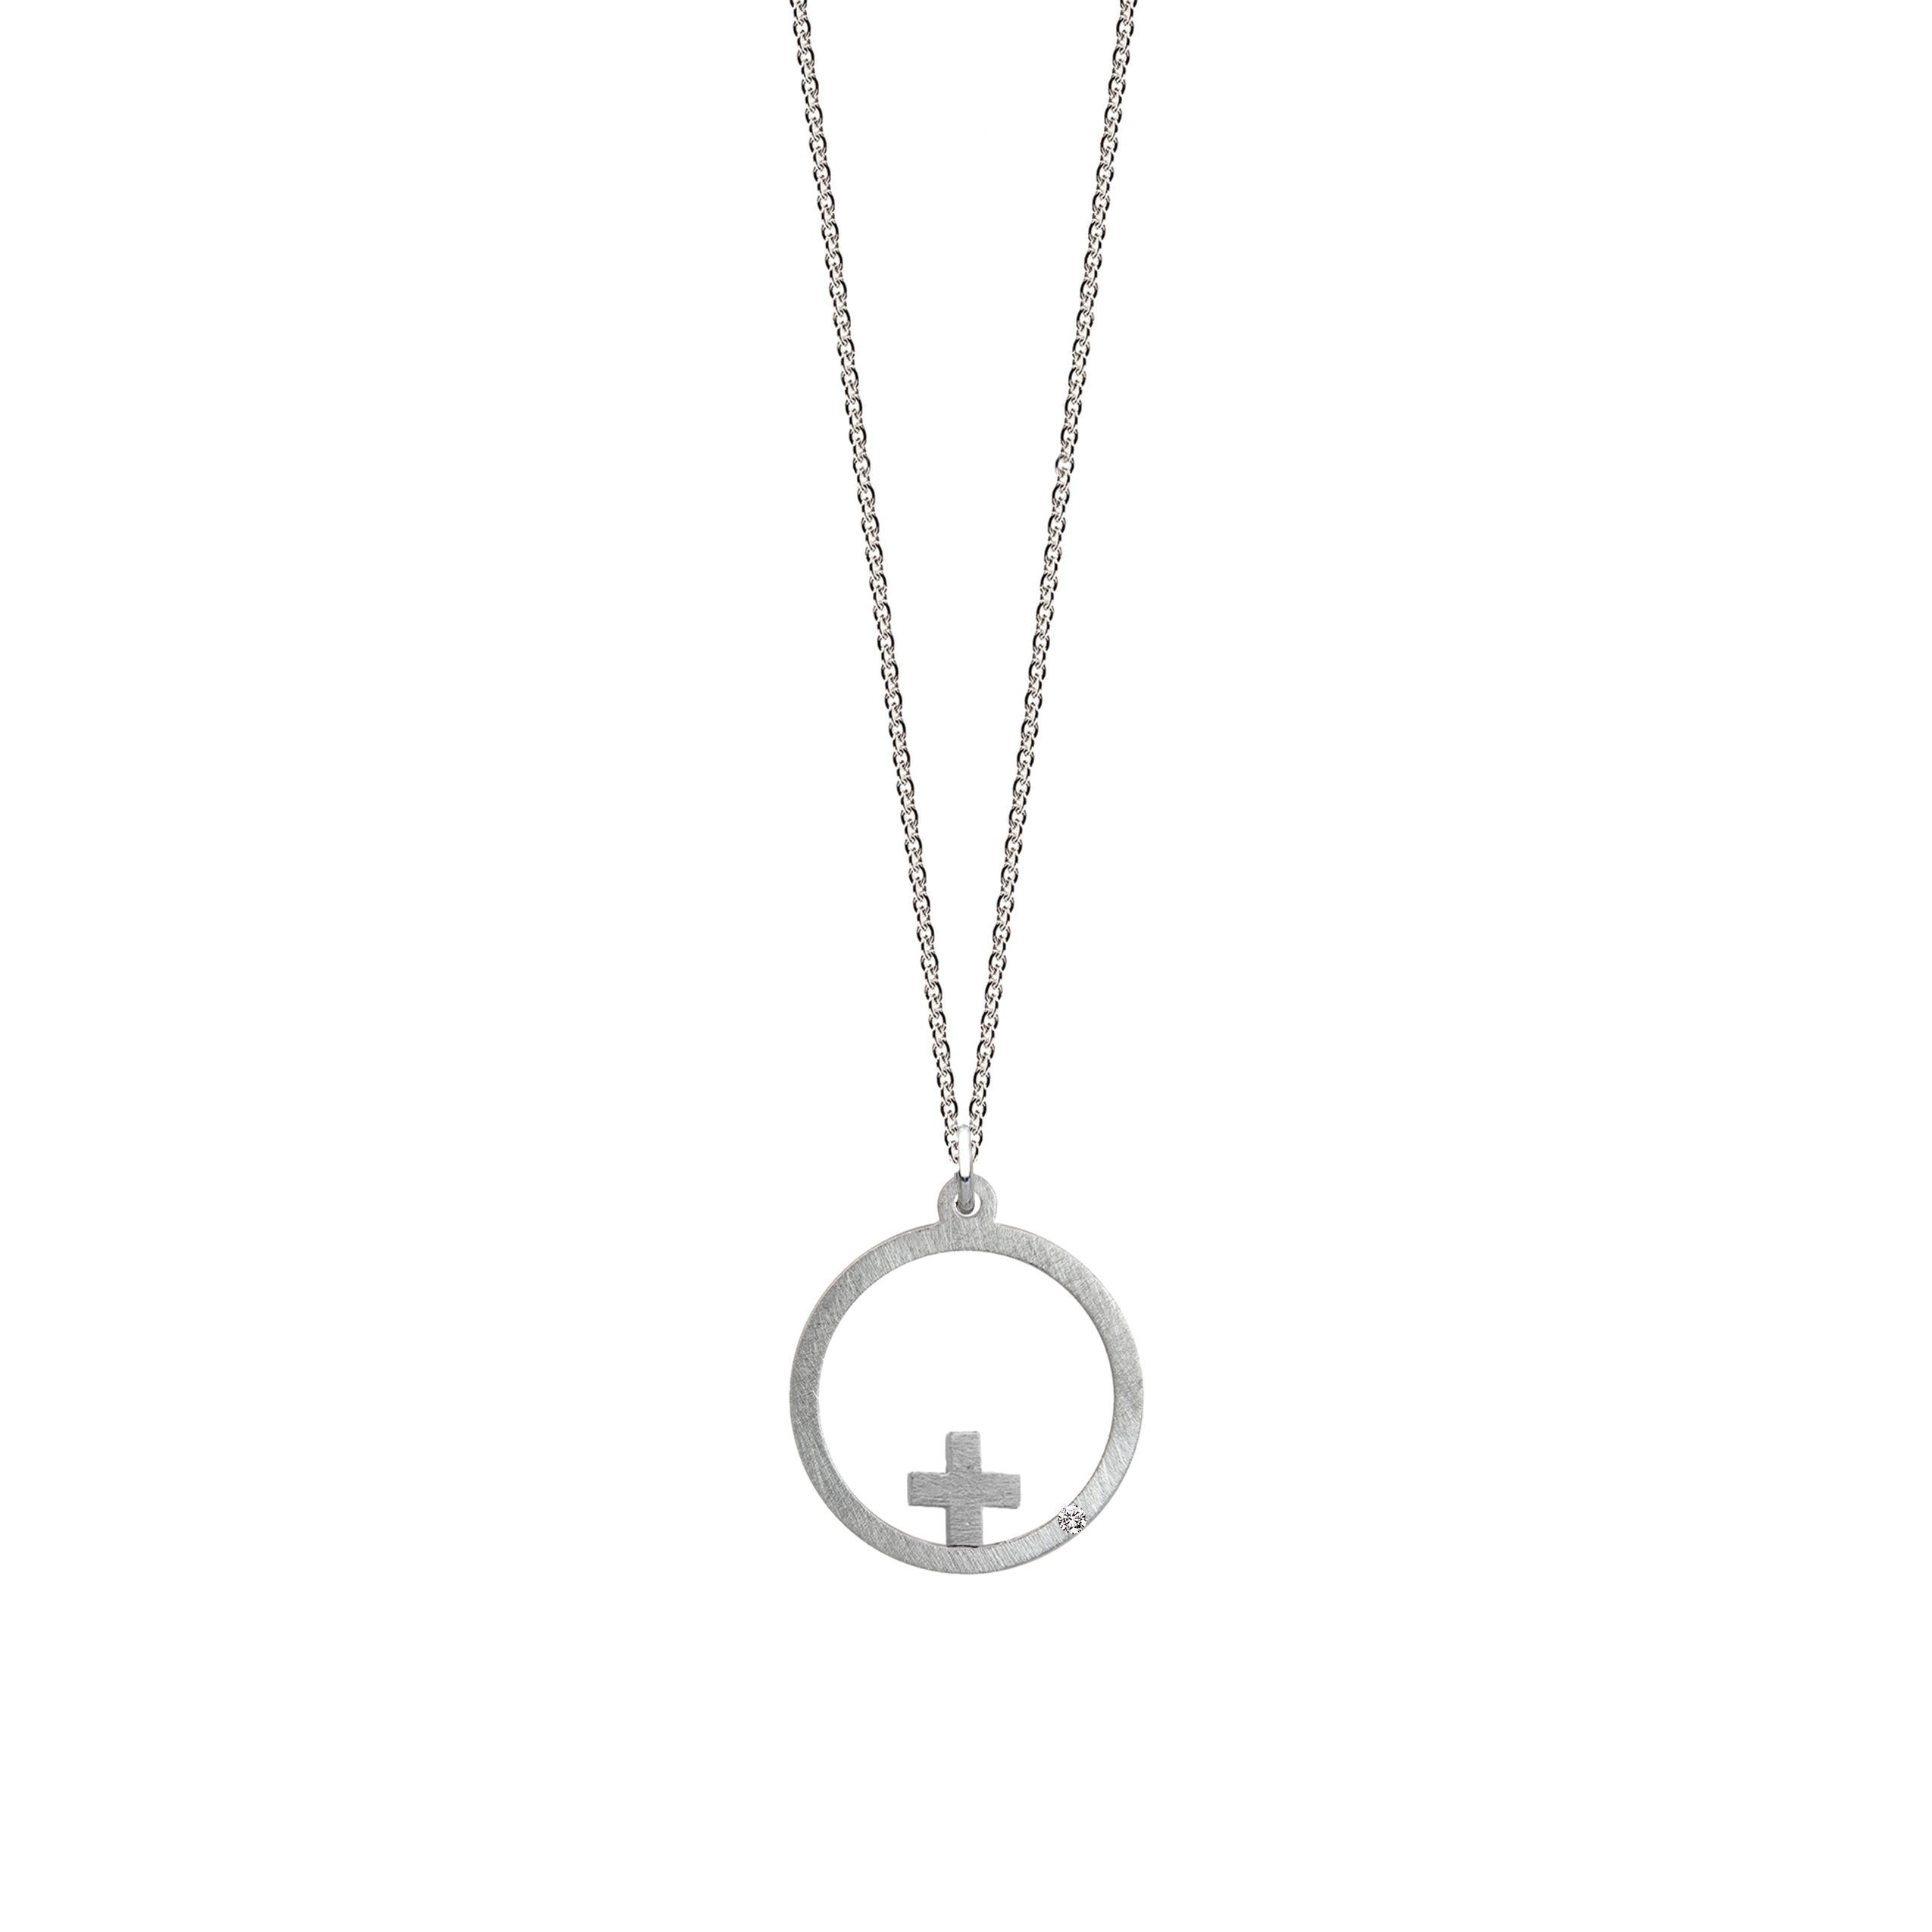 Intention pendant "POWER" with brilliant 0.007ct TWVS